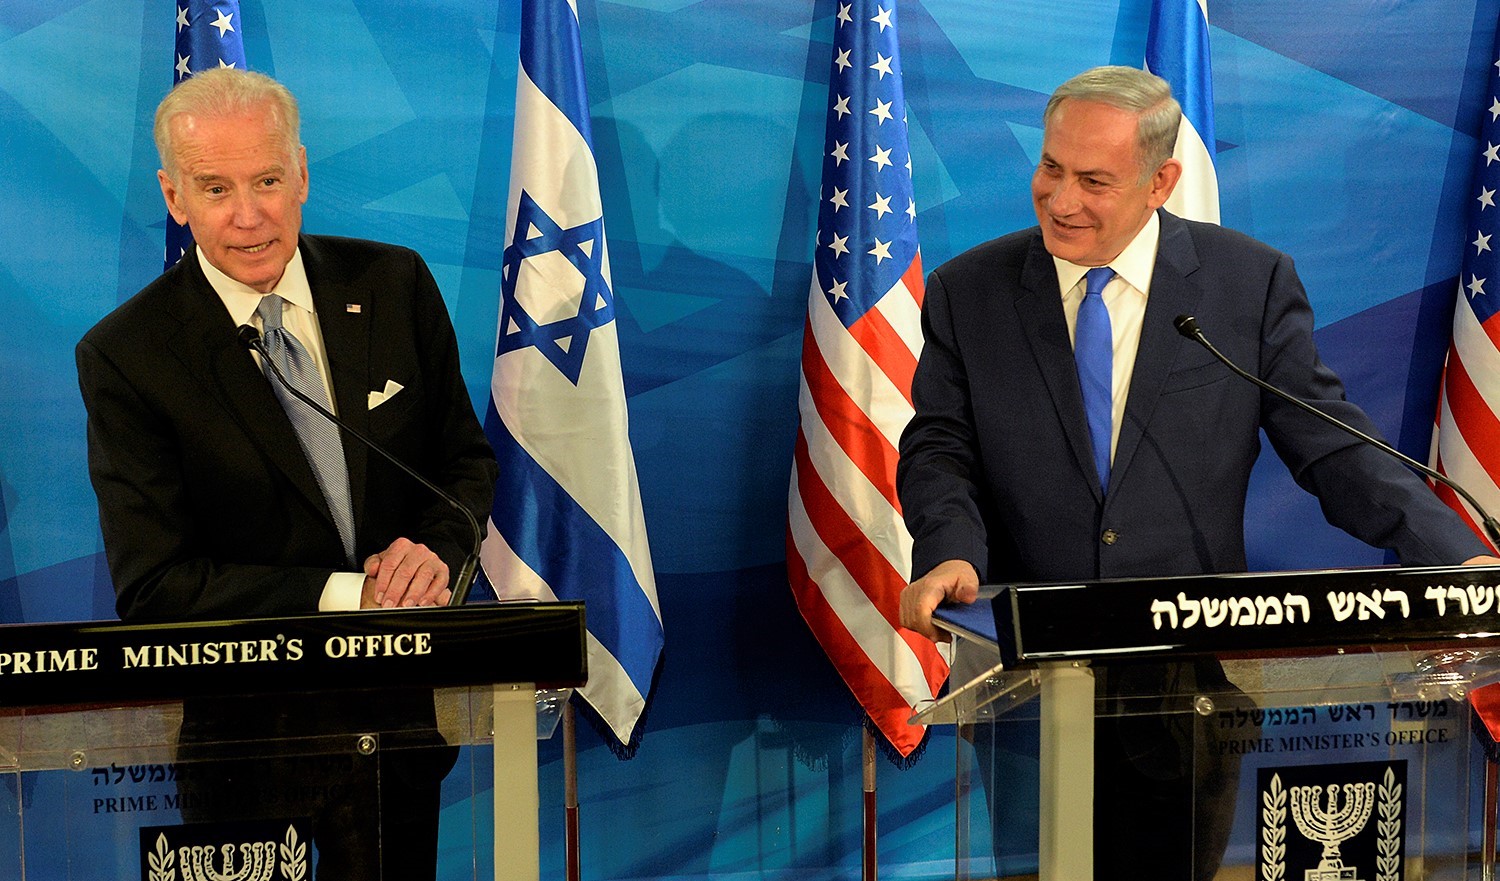 Israel and the US must focus on core mutual interests